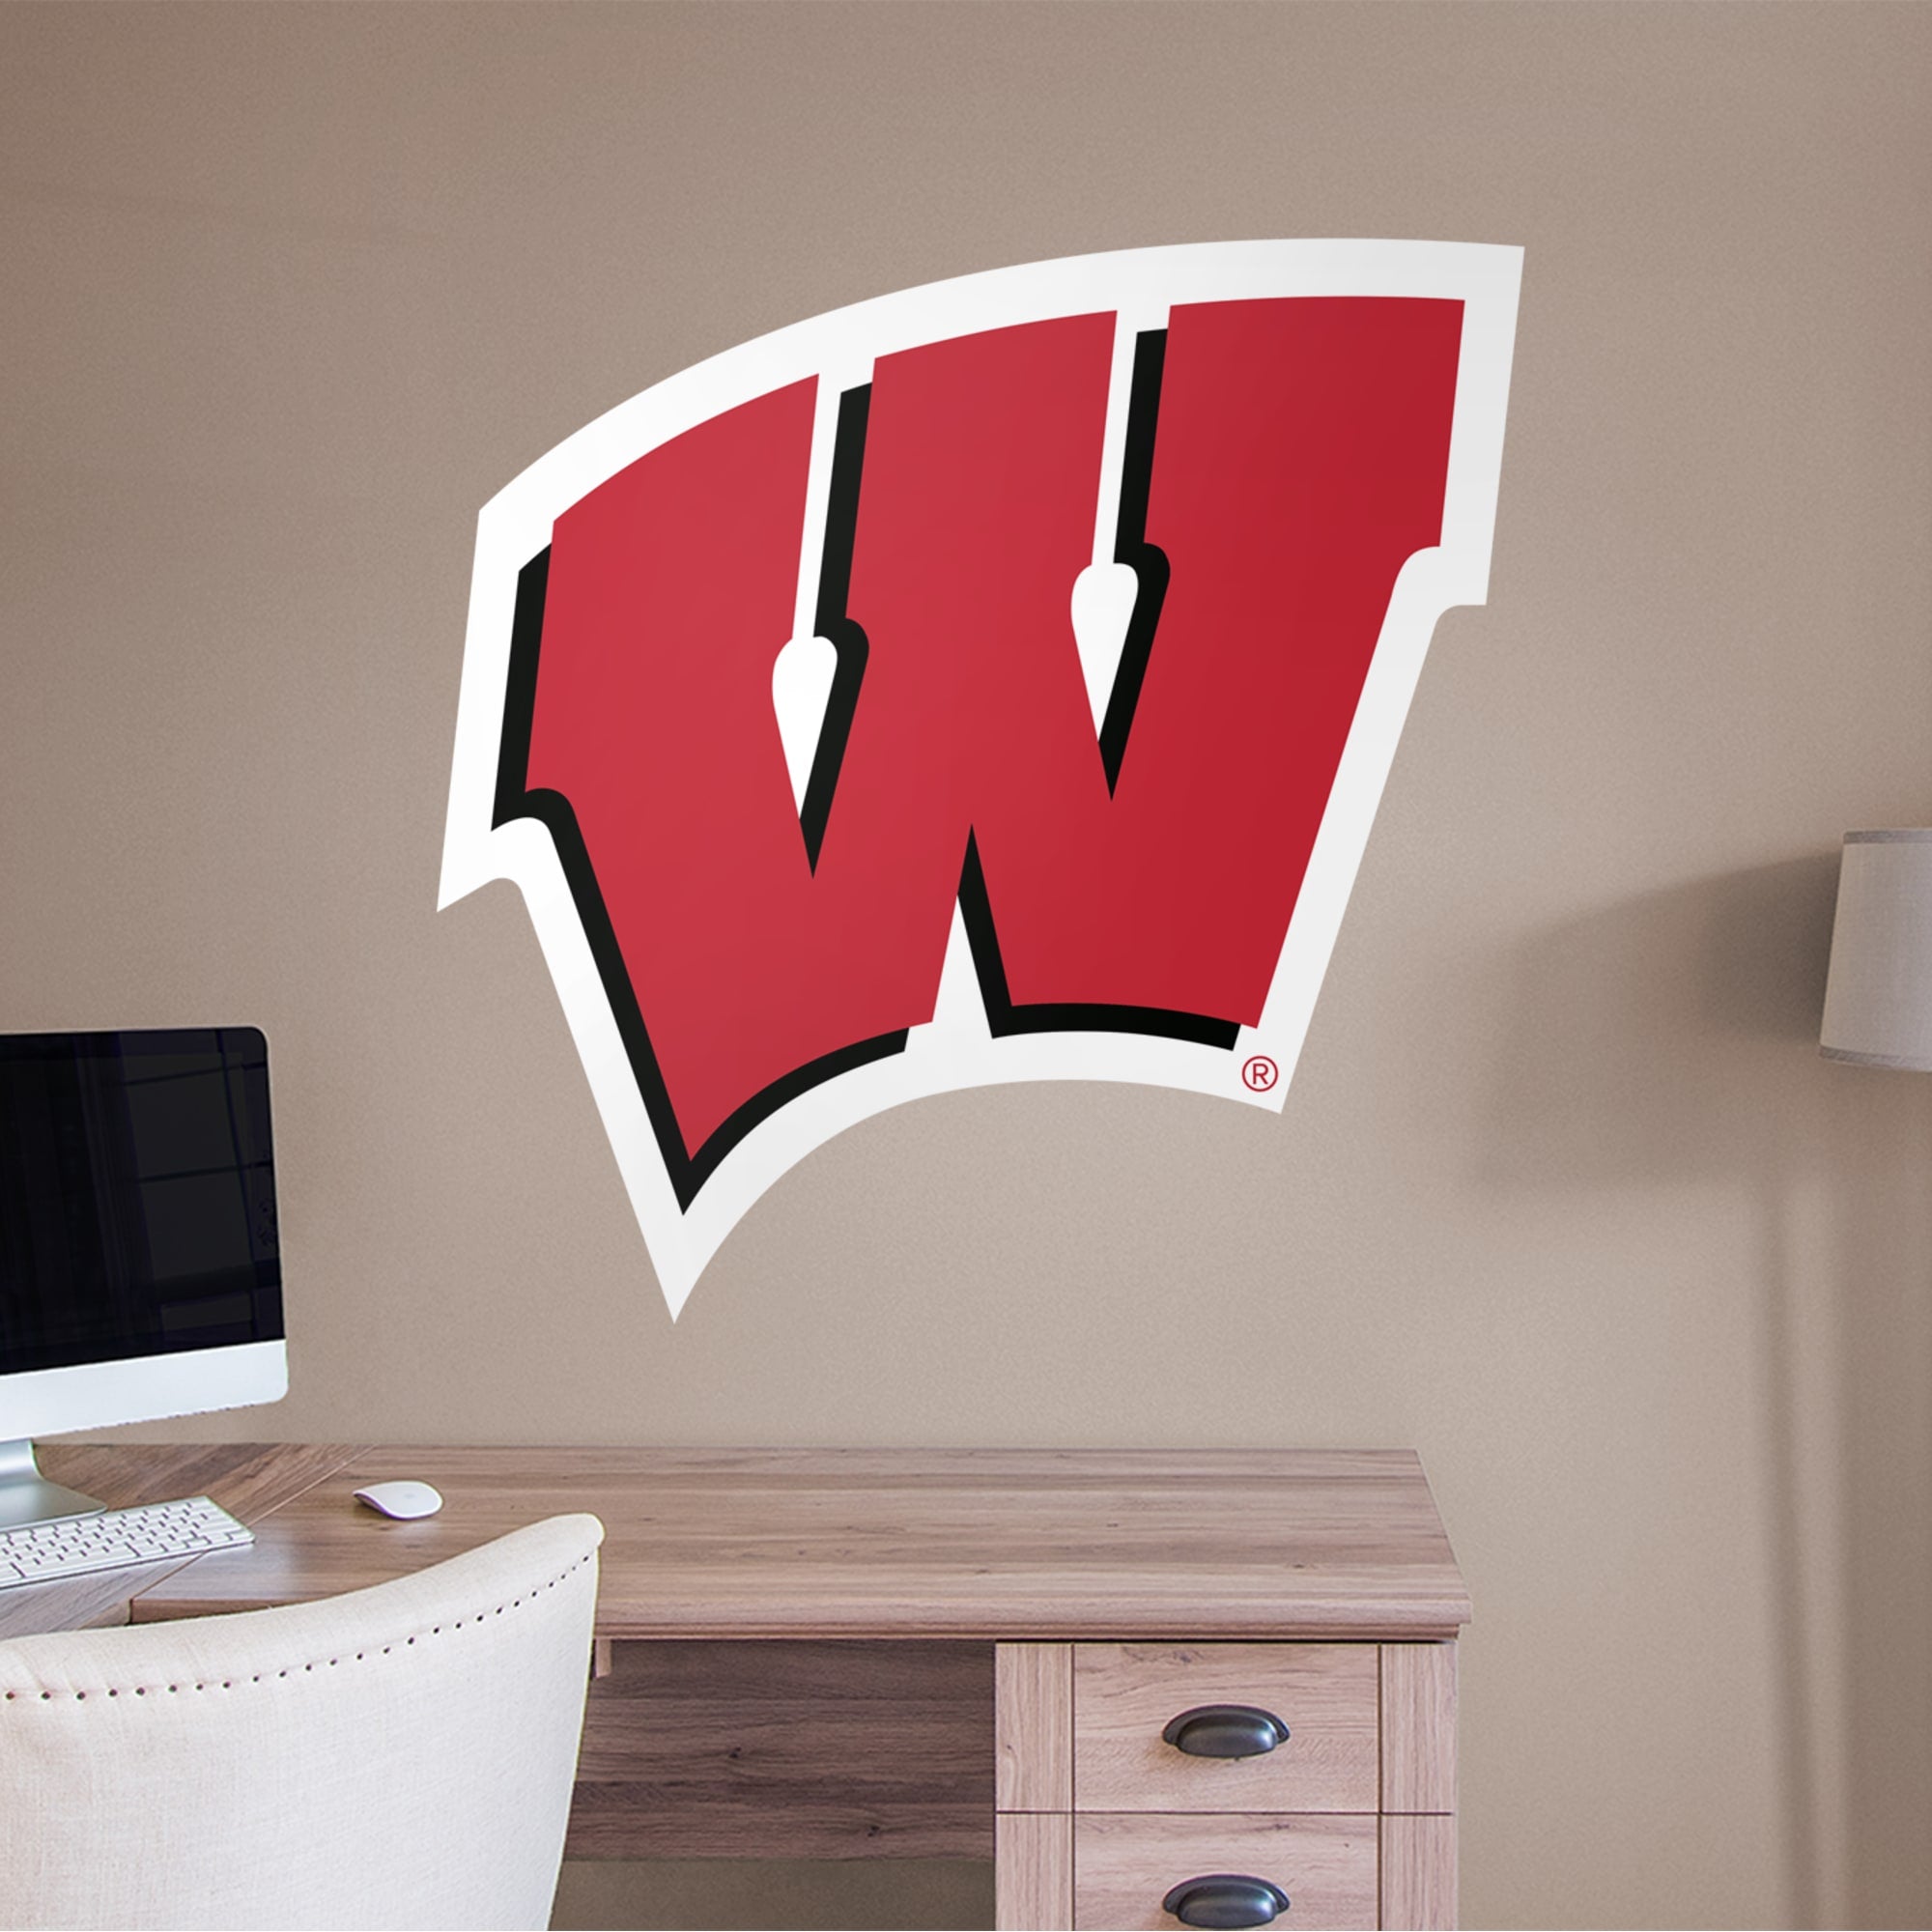 Wisconsin Badgers: Logo - Officially Licensed Removable Wall Decal 43.0"W x 43.0"H by Fathead | Vinyl